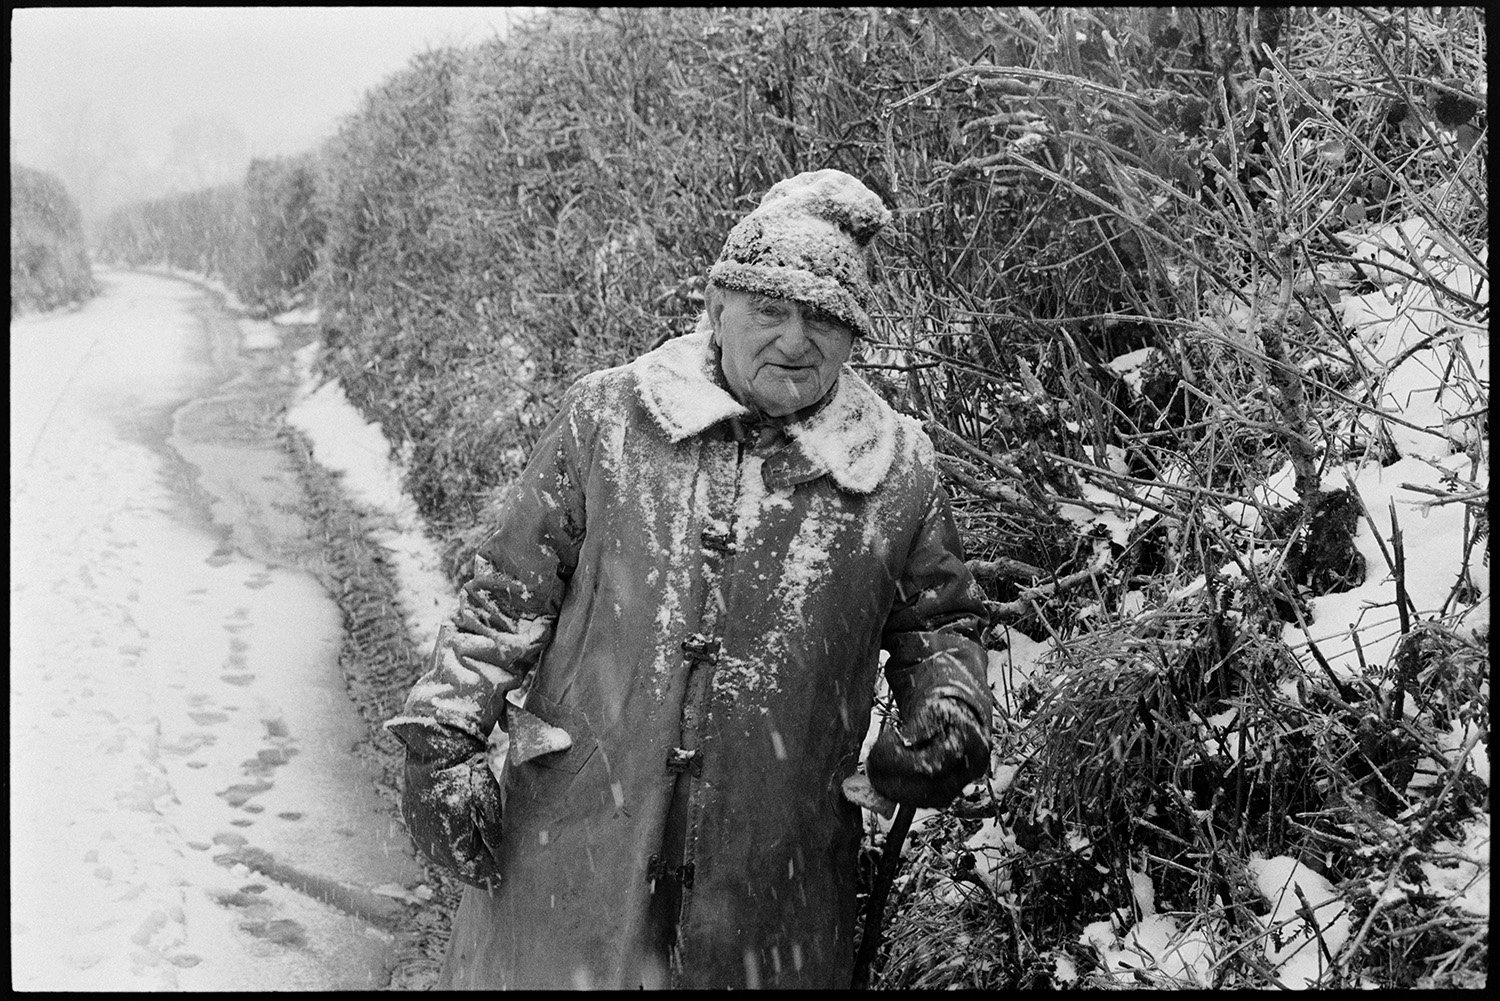 Snow, farmer and woman walking up lane, covered in snow. 
[Archie Parkhouse walking along West lane, Dolton which is covered in snow. He is wearing a woolly hat, a coat and gloves which have snow on them. Snow is falling.]